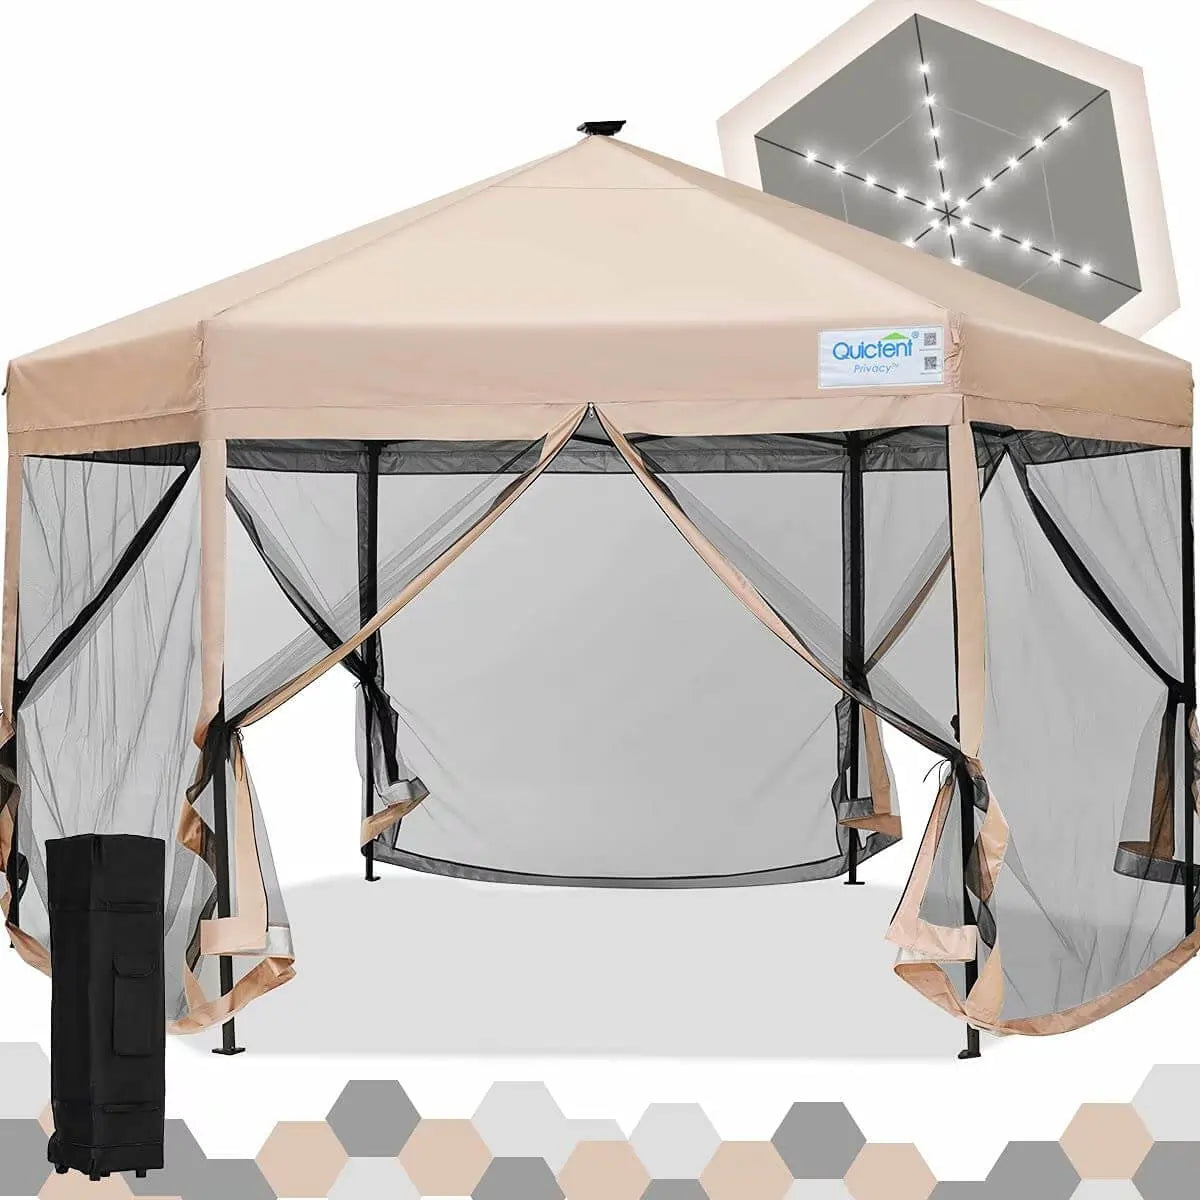 13' x 13' Hexagonal Pop up Canopy with Netting and Lights